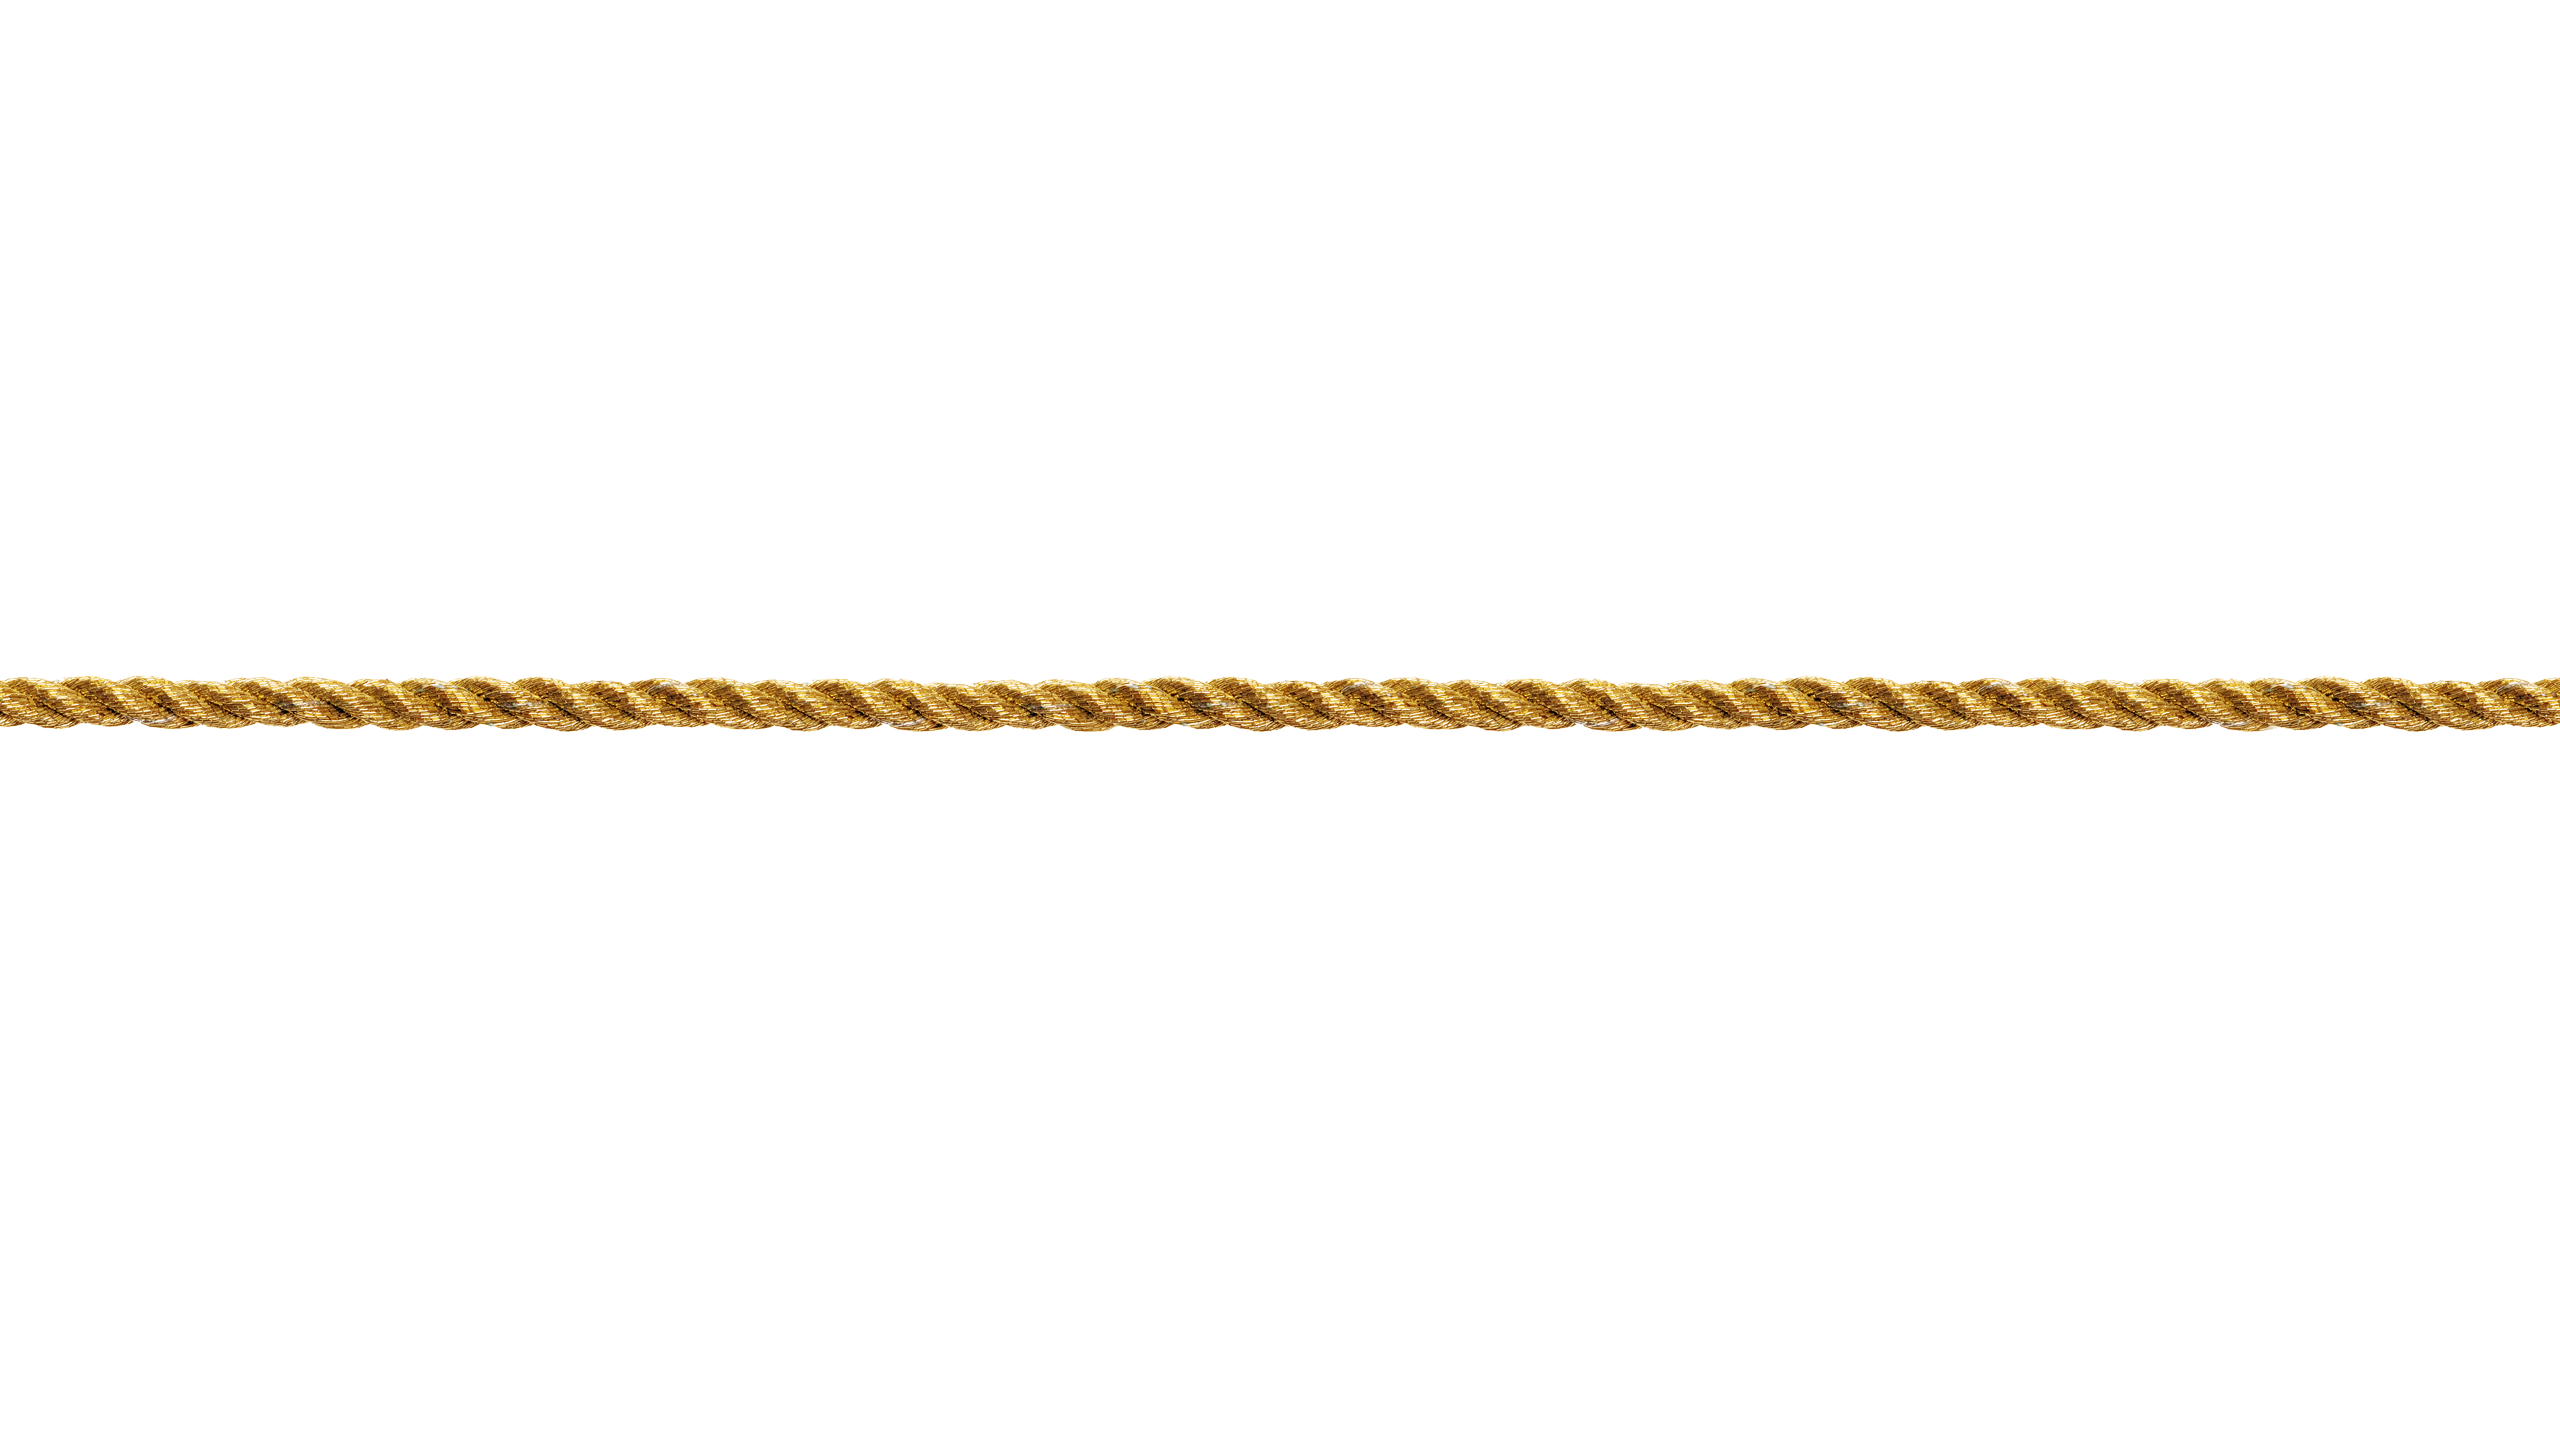 A Close-up Of A Rope